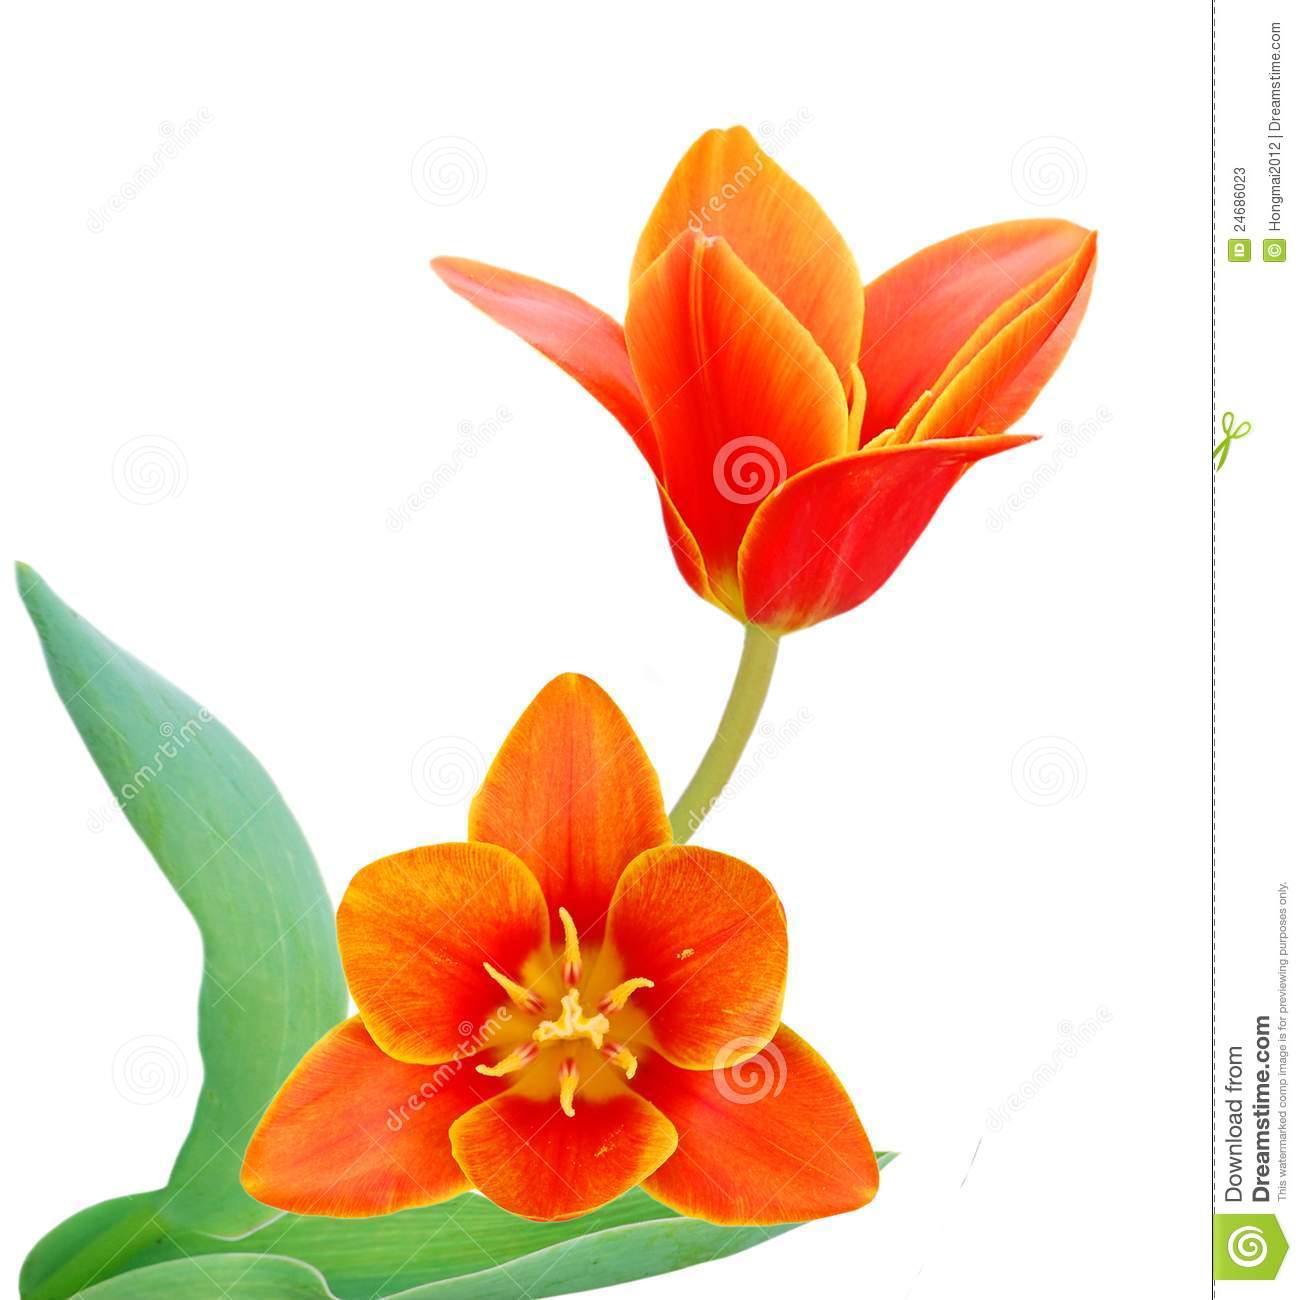 Liliaceae clipart #20, Download drawings